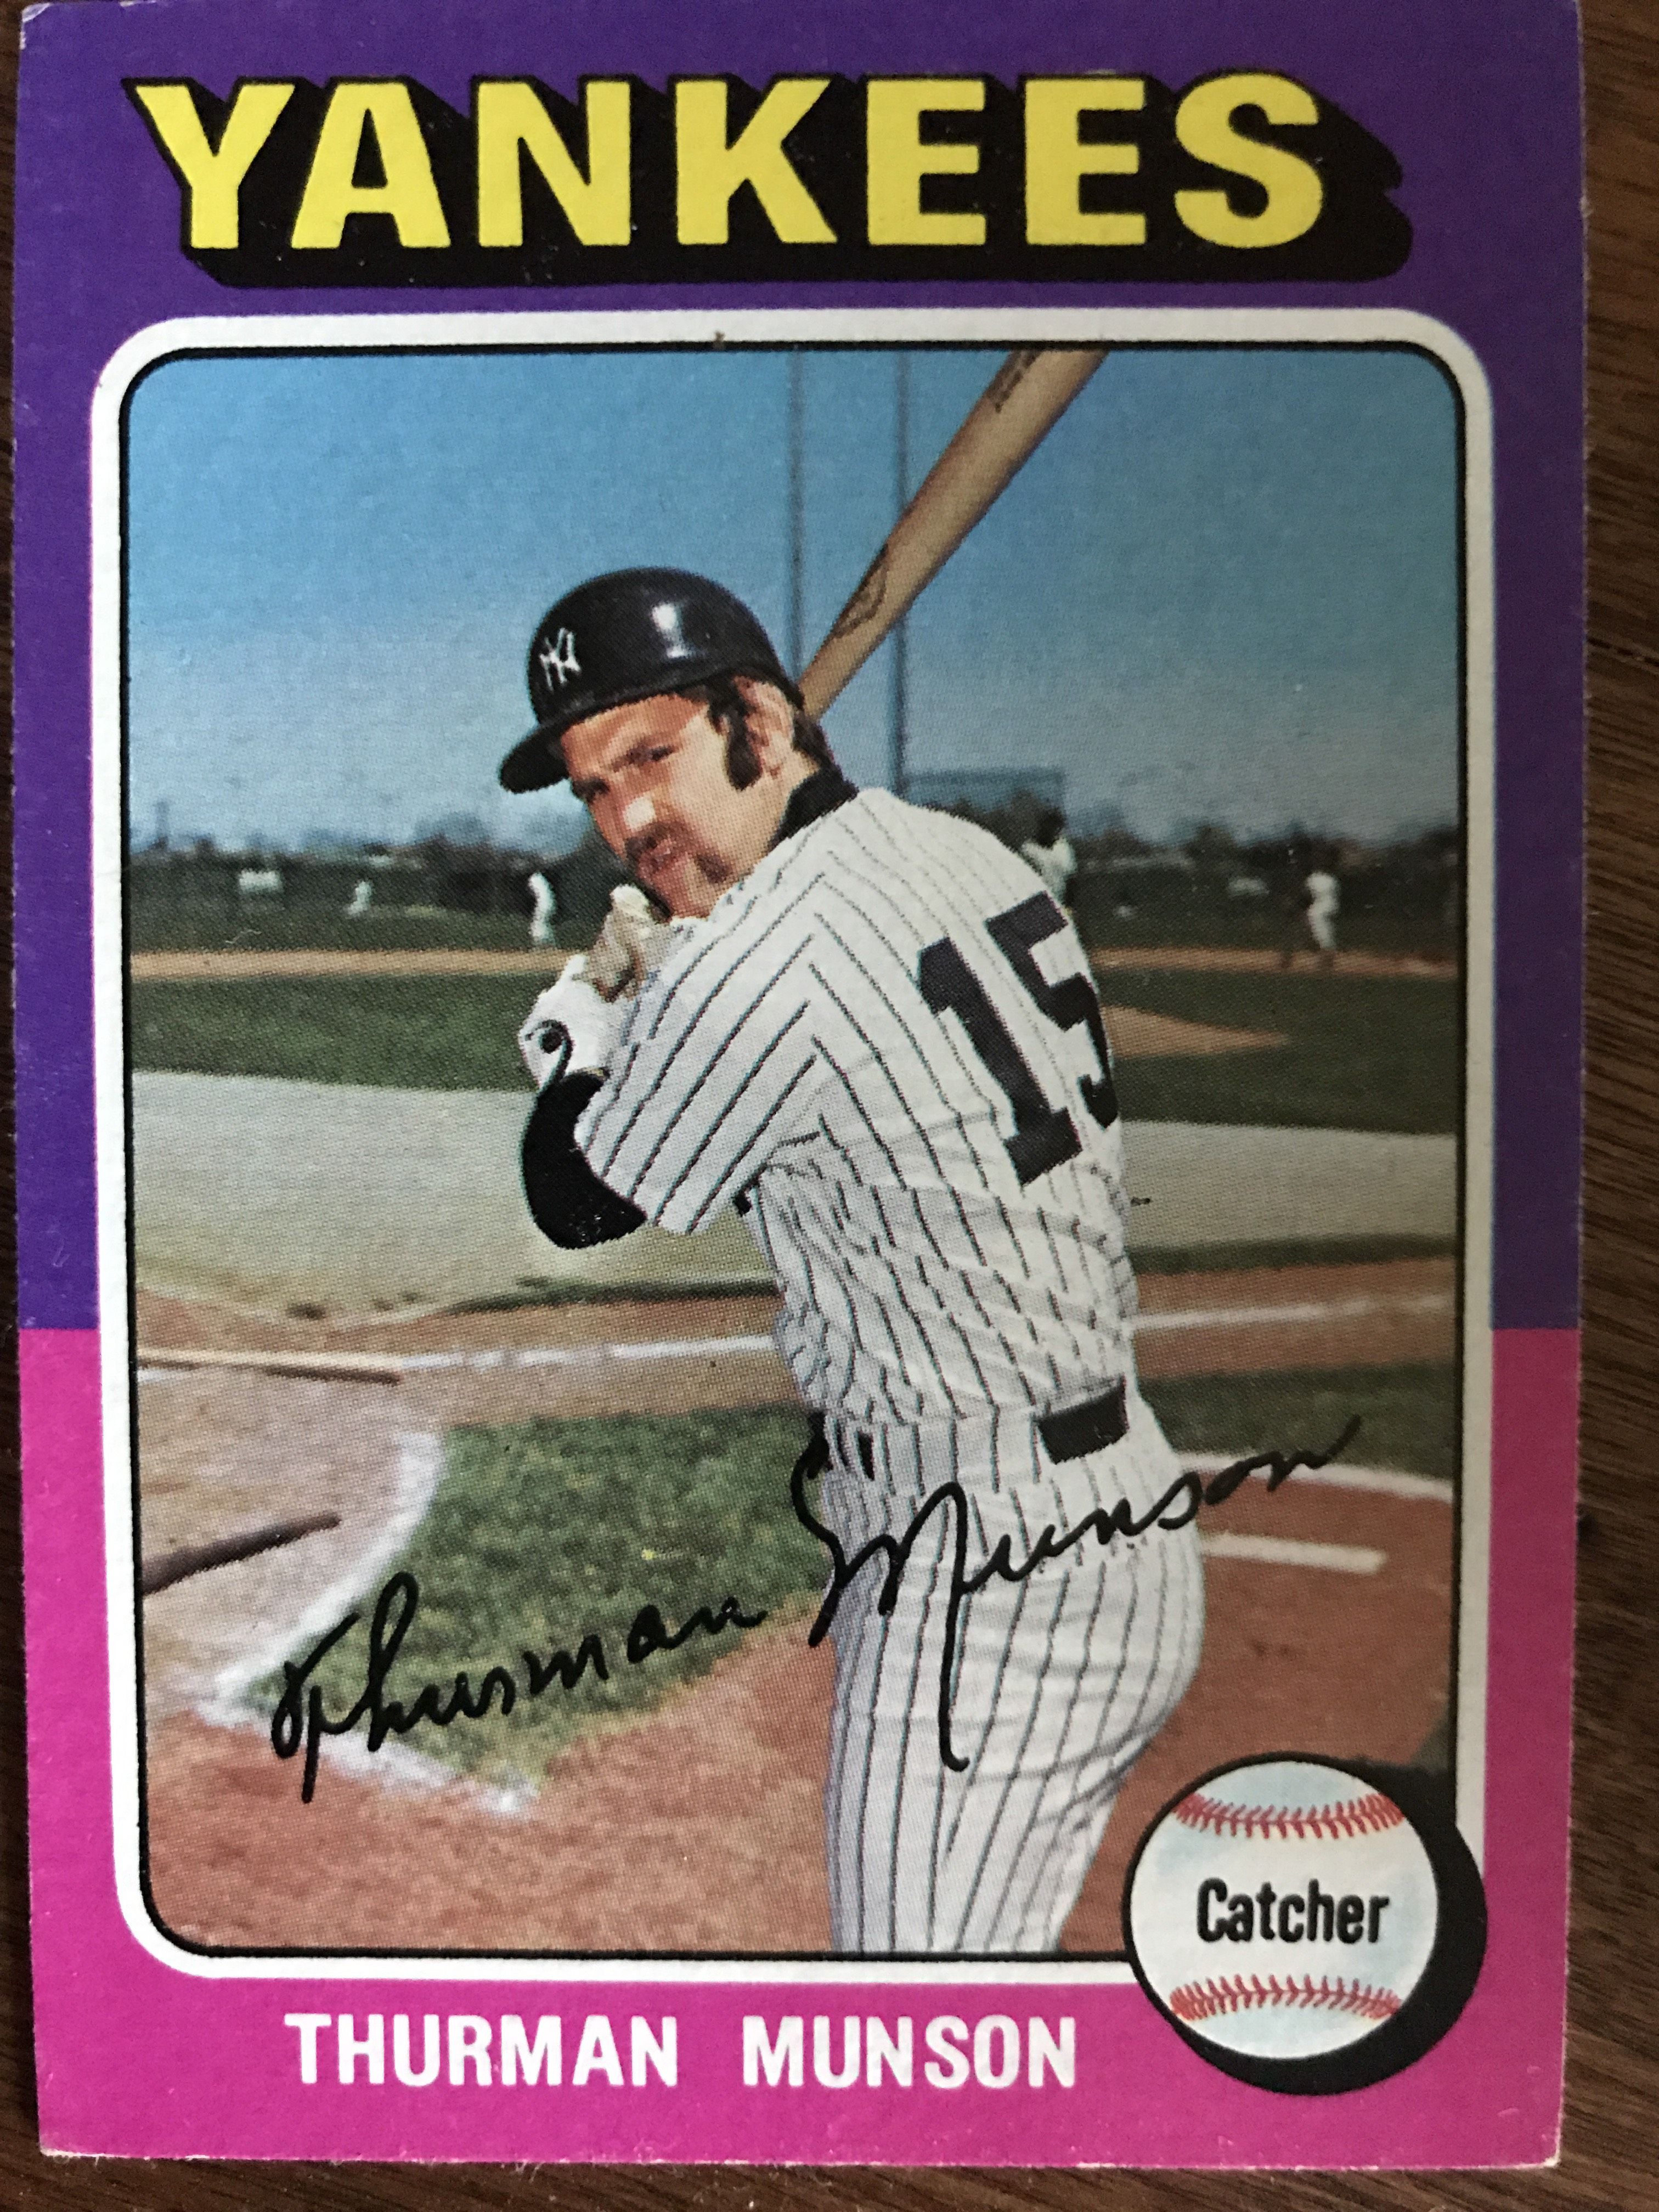 1975 #20 Topps Card is of New York Yankees' Thurman Munson – 15 Cent Cards  One at a Time